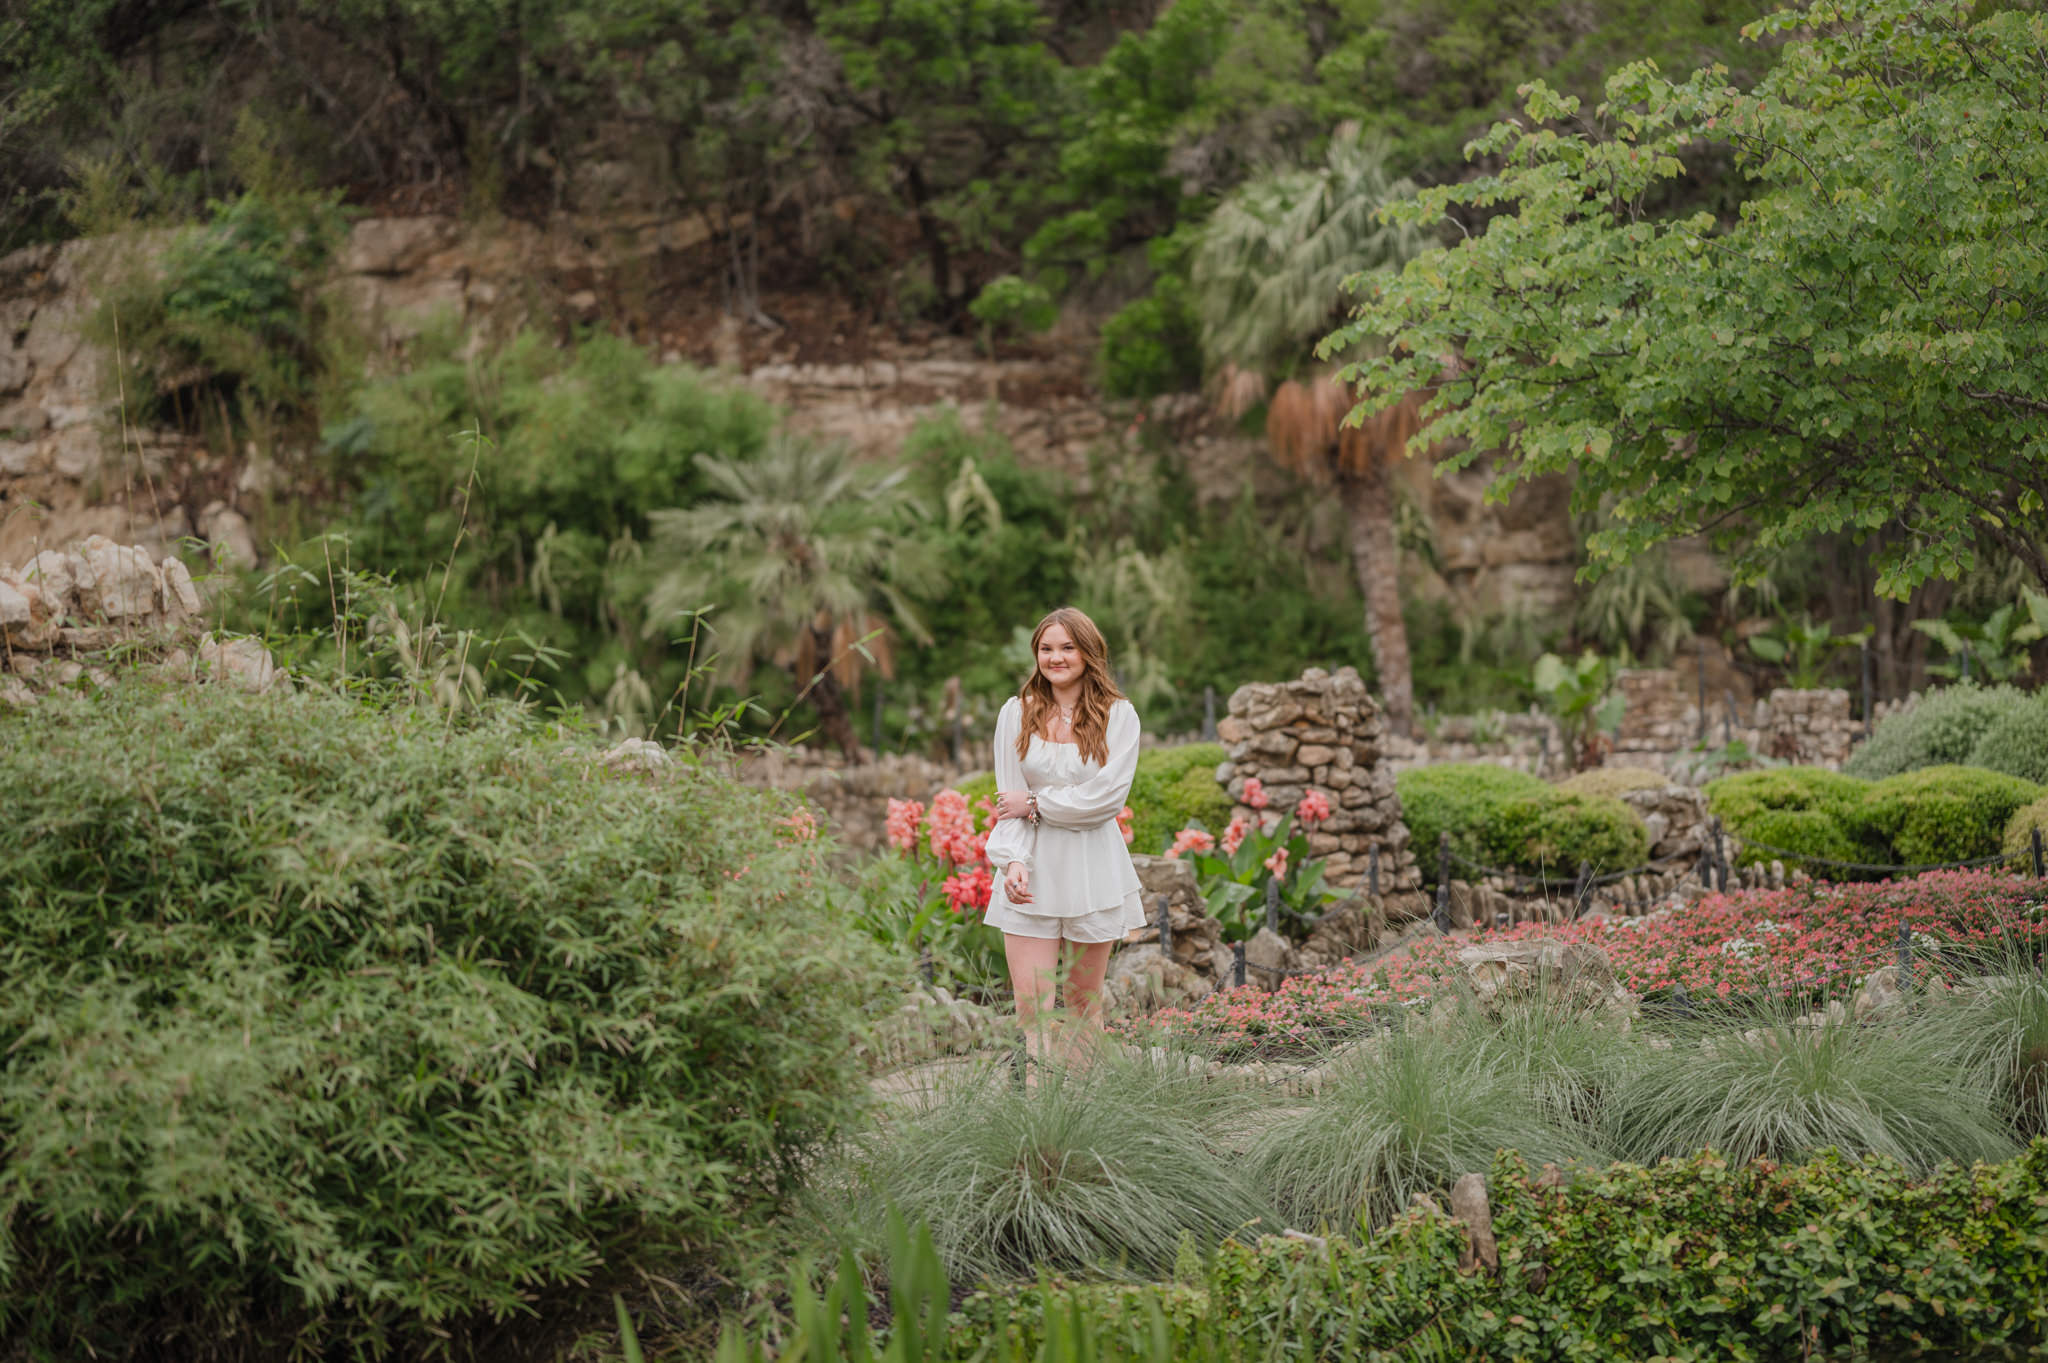 Pull-back landscape image of a senior girl in a white dress at the Japanese Tea Garden in San Antonio. She is surrounded by lush greenery.